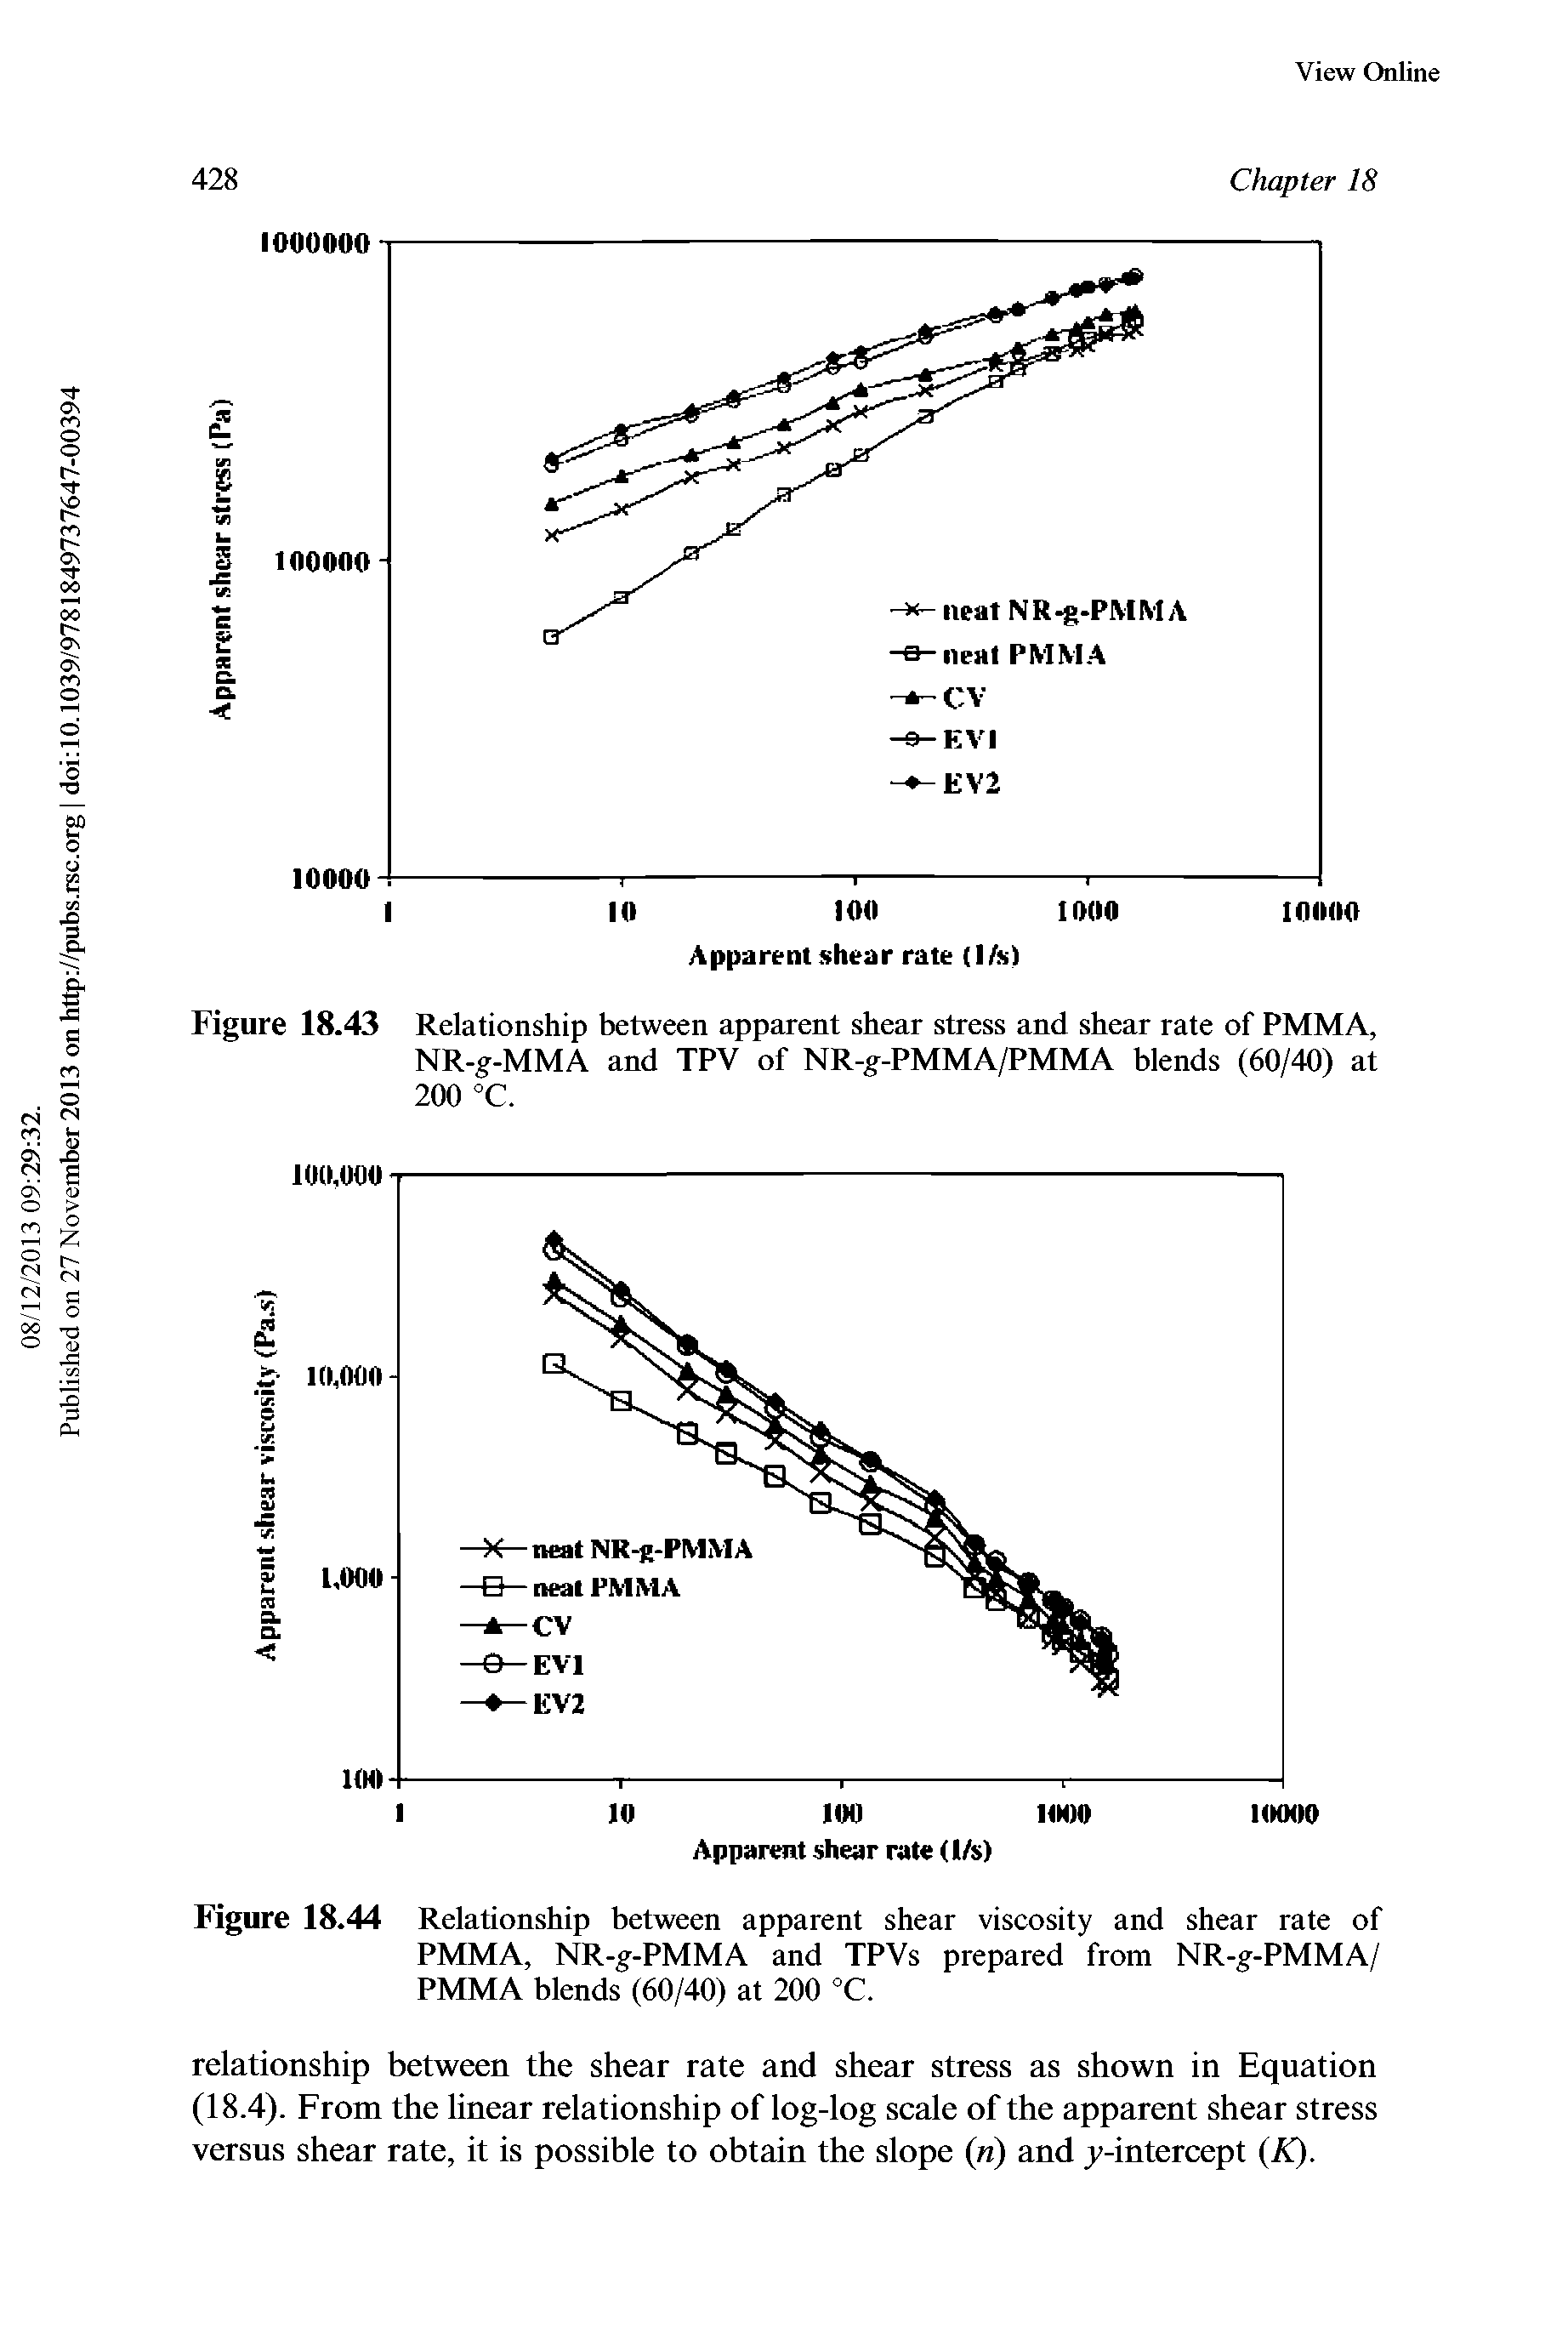 Figure 18.44 Relationship between apparent shear viscosity and shear rate of PMMA, NR-g-PMMA and TPVs prepared from NR-g-PMMA/ PMMA blends (60/40) at 200 °C.